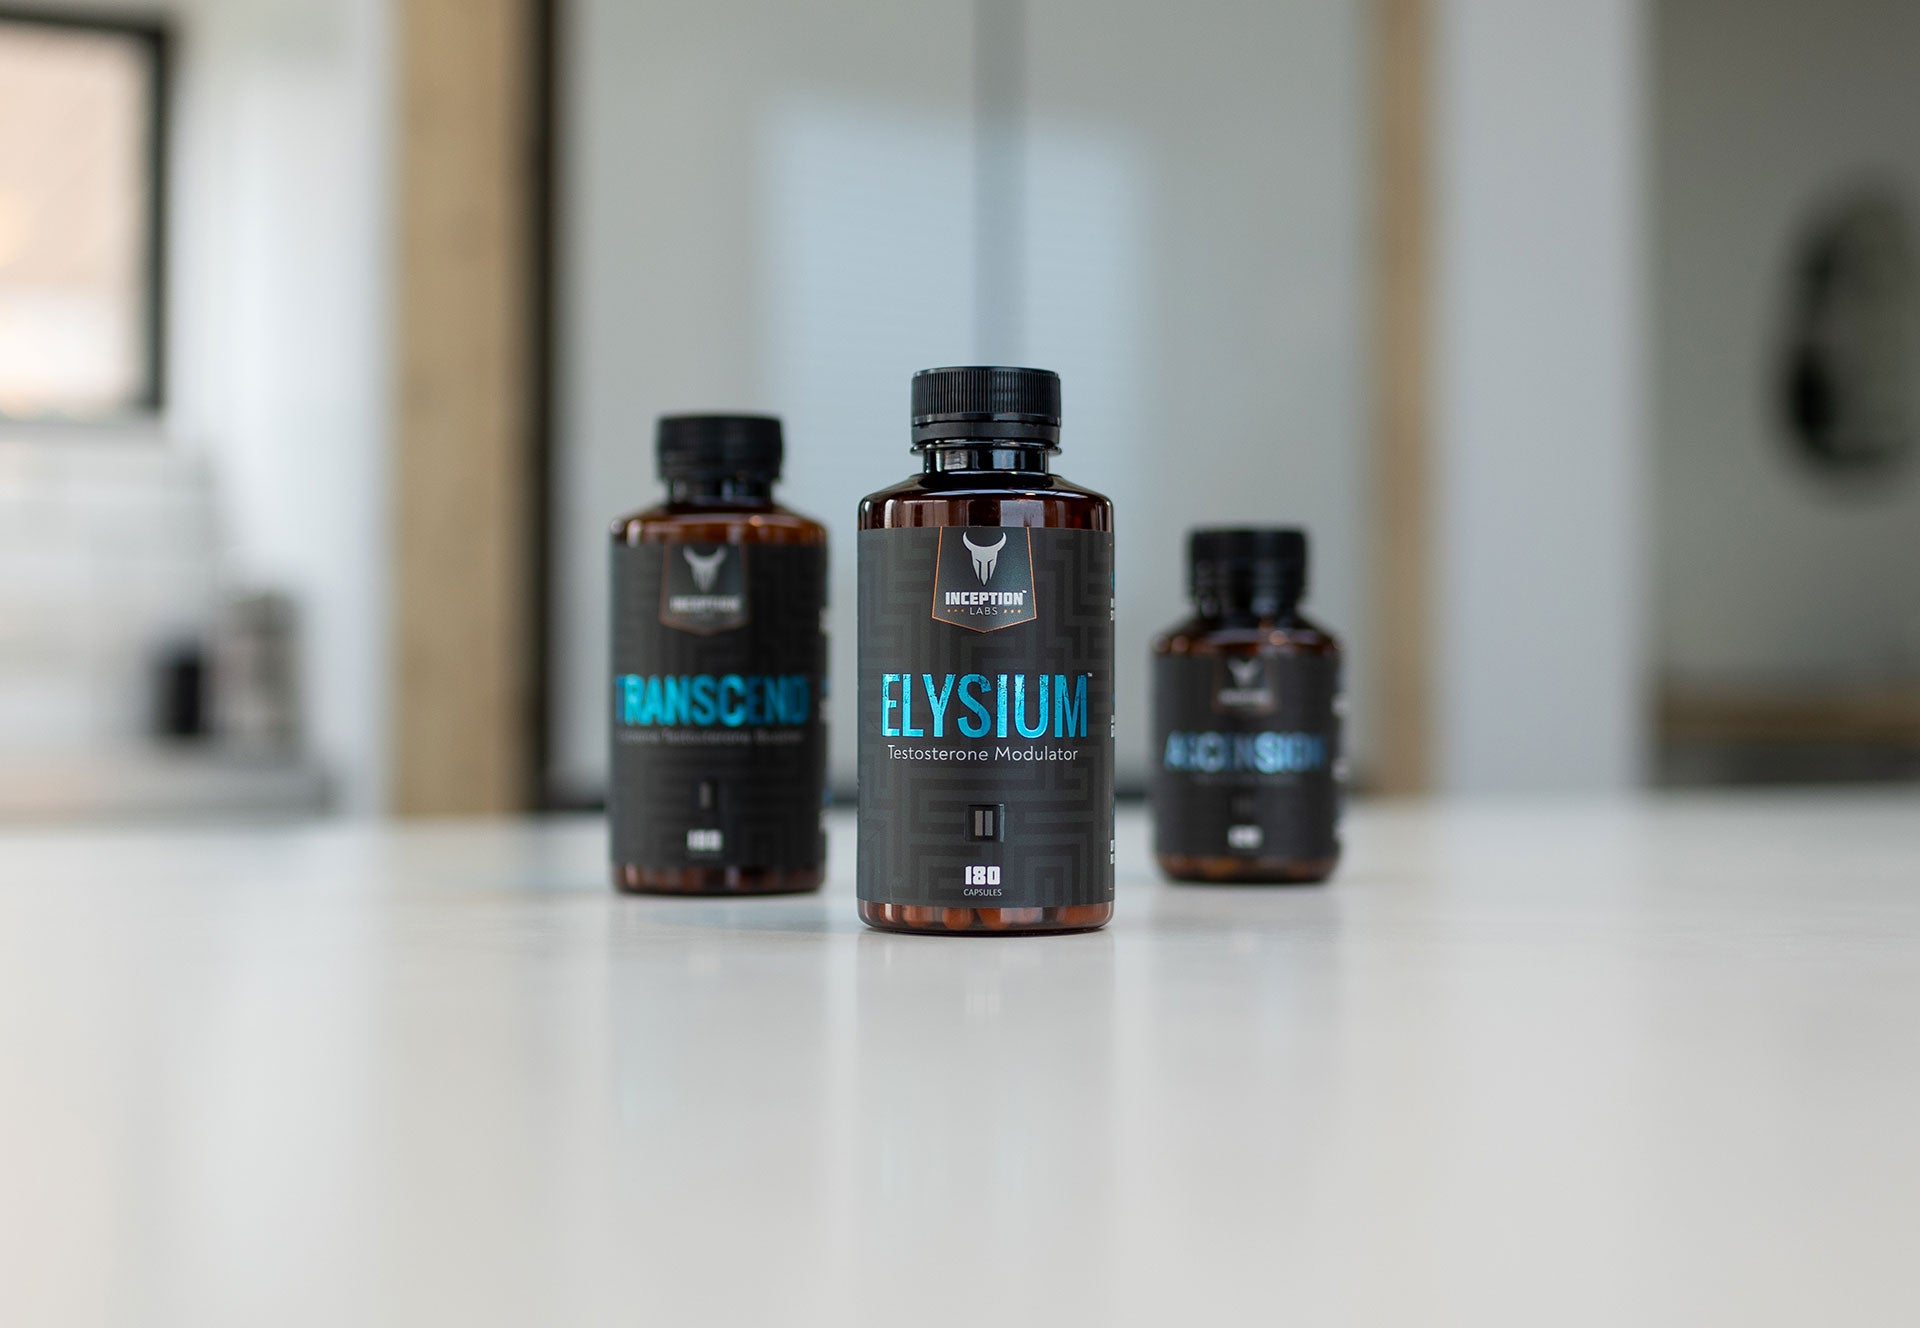 Elysium Testosterone Modulator from Inception Labs